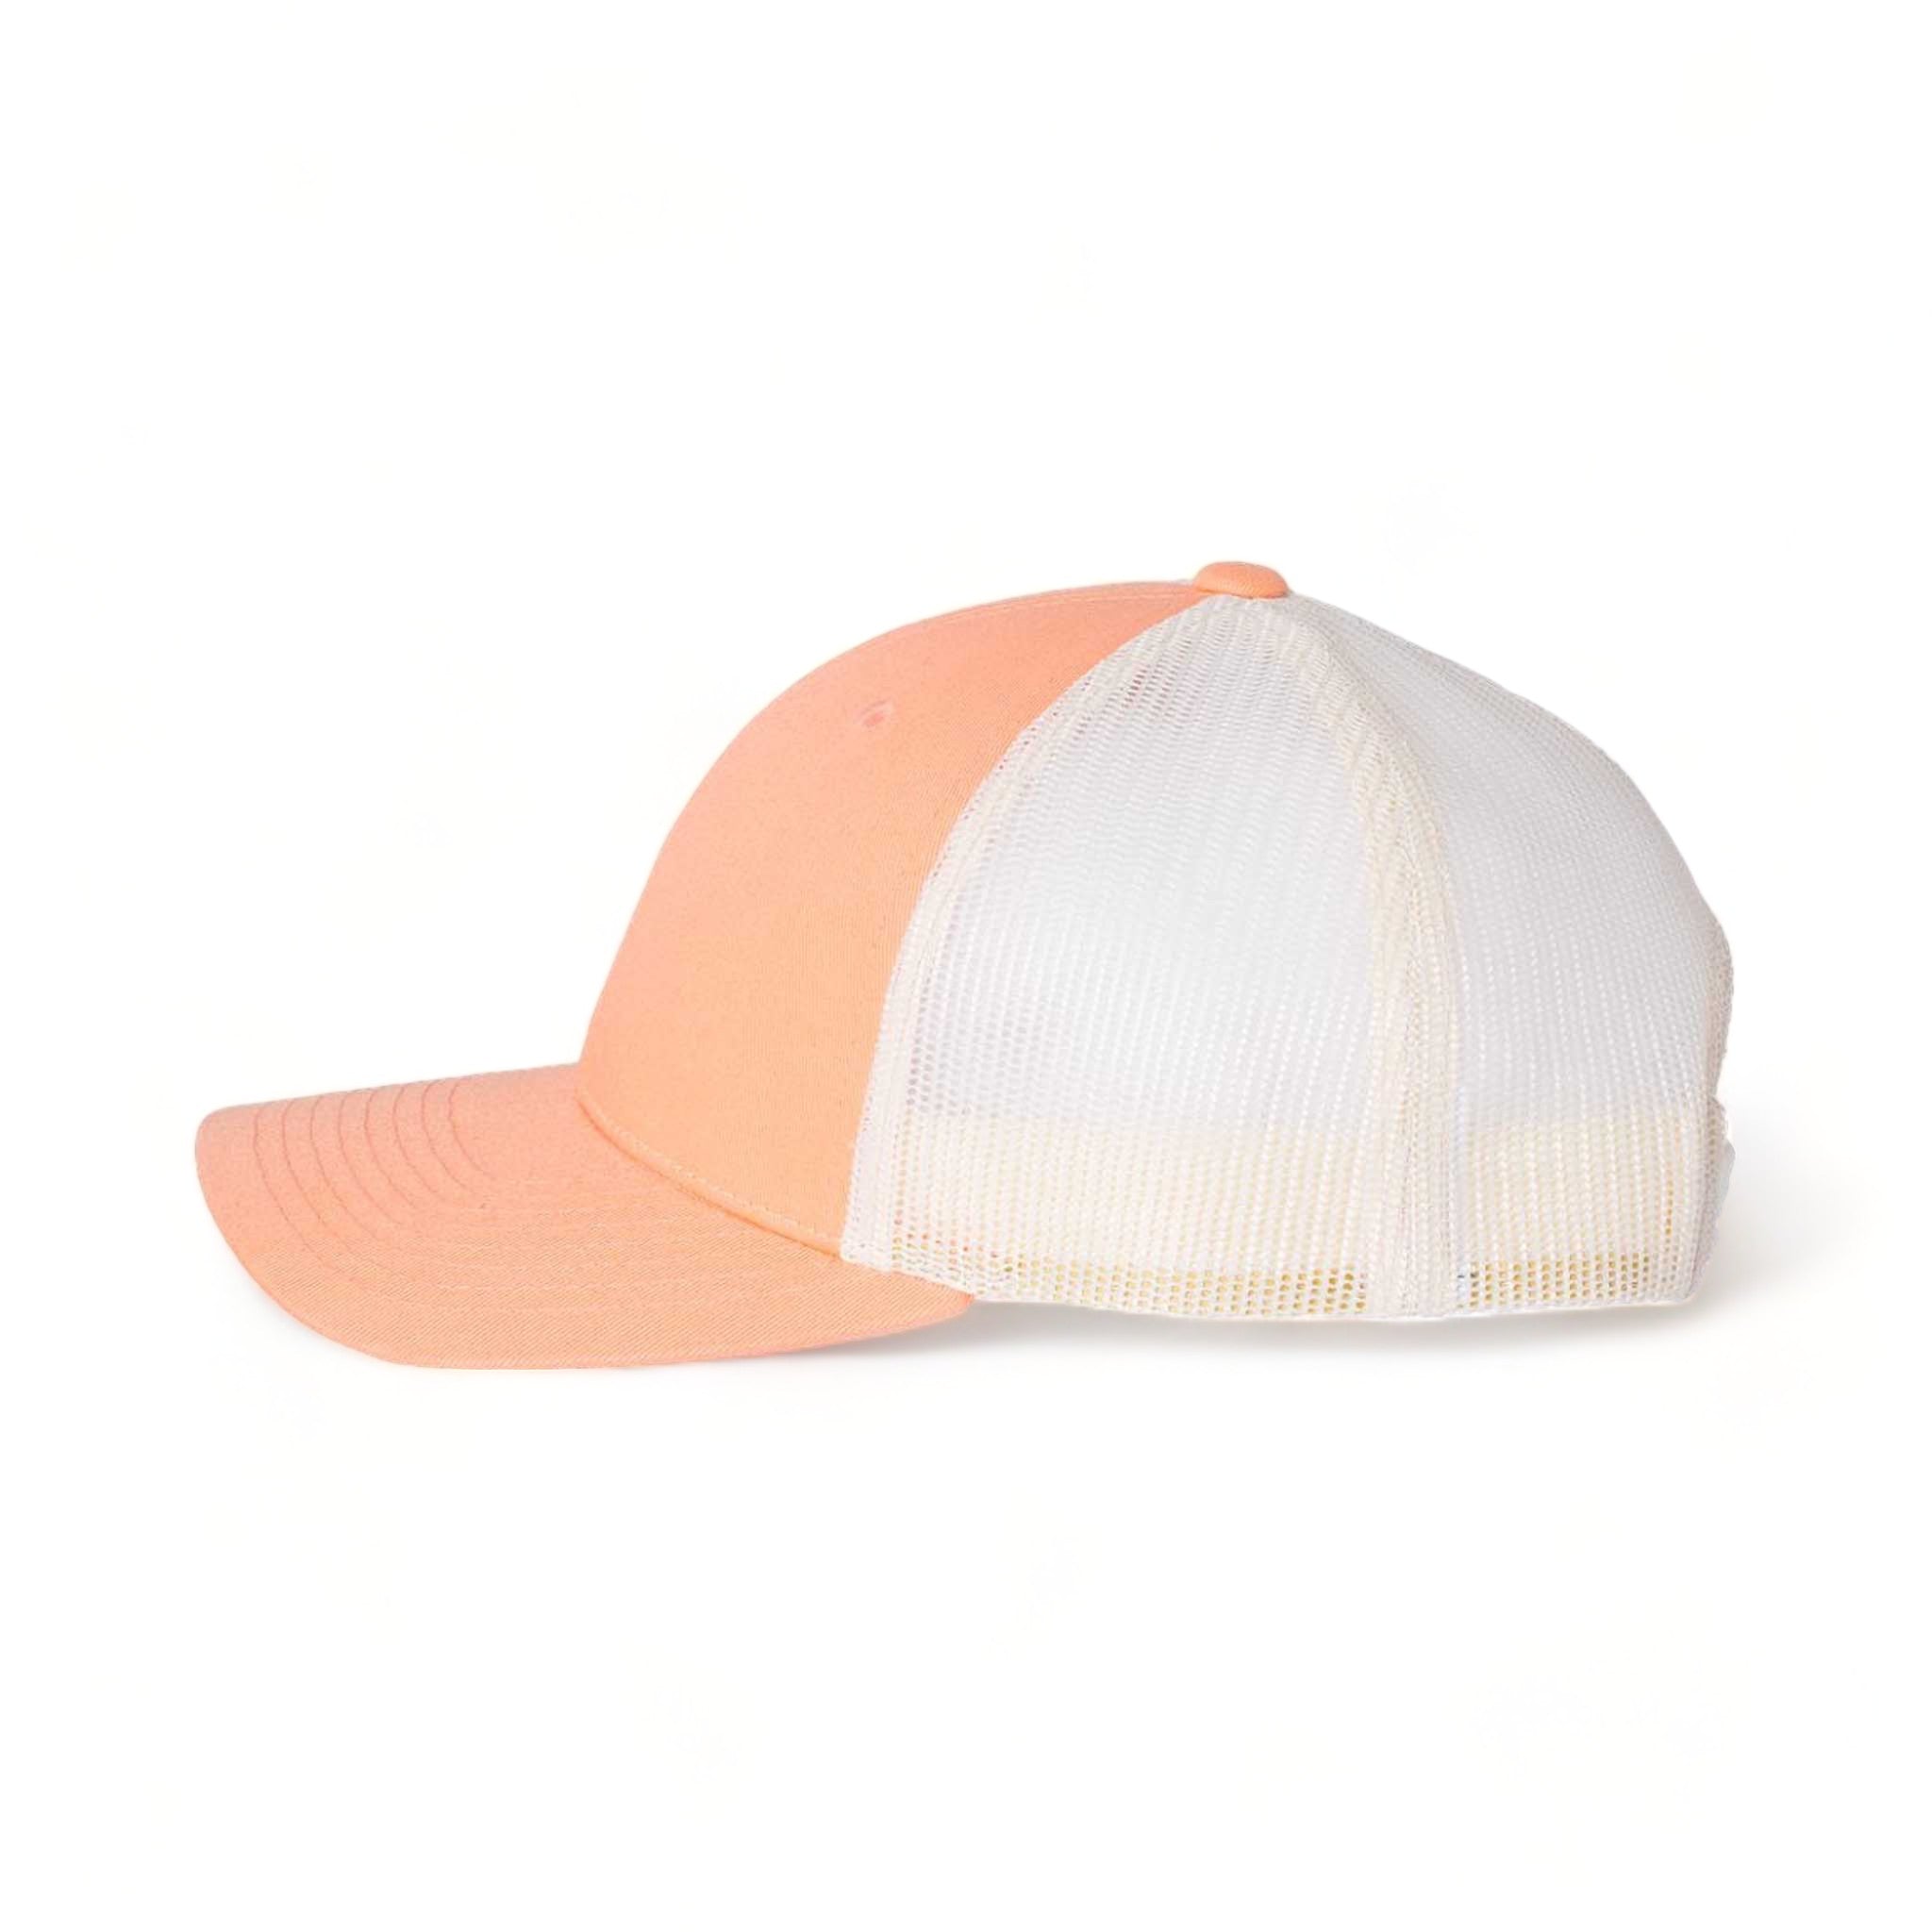 Side view of Richardson 115 custom hat in sunkissed peach and birch